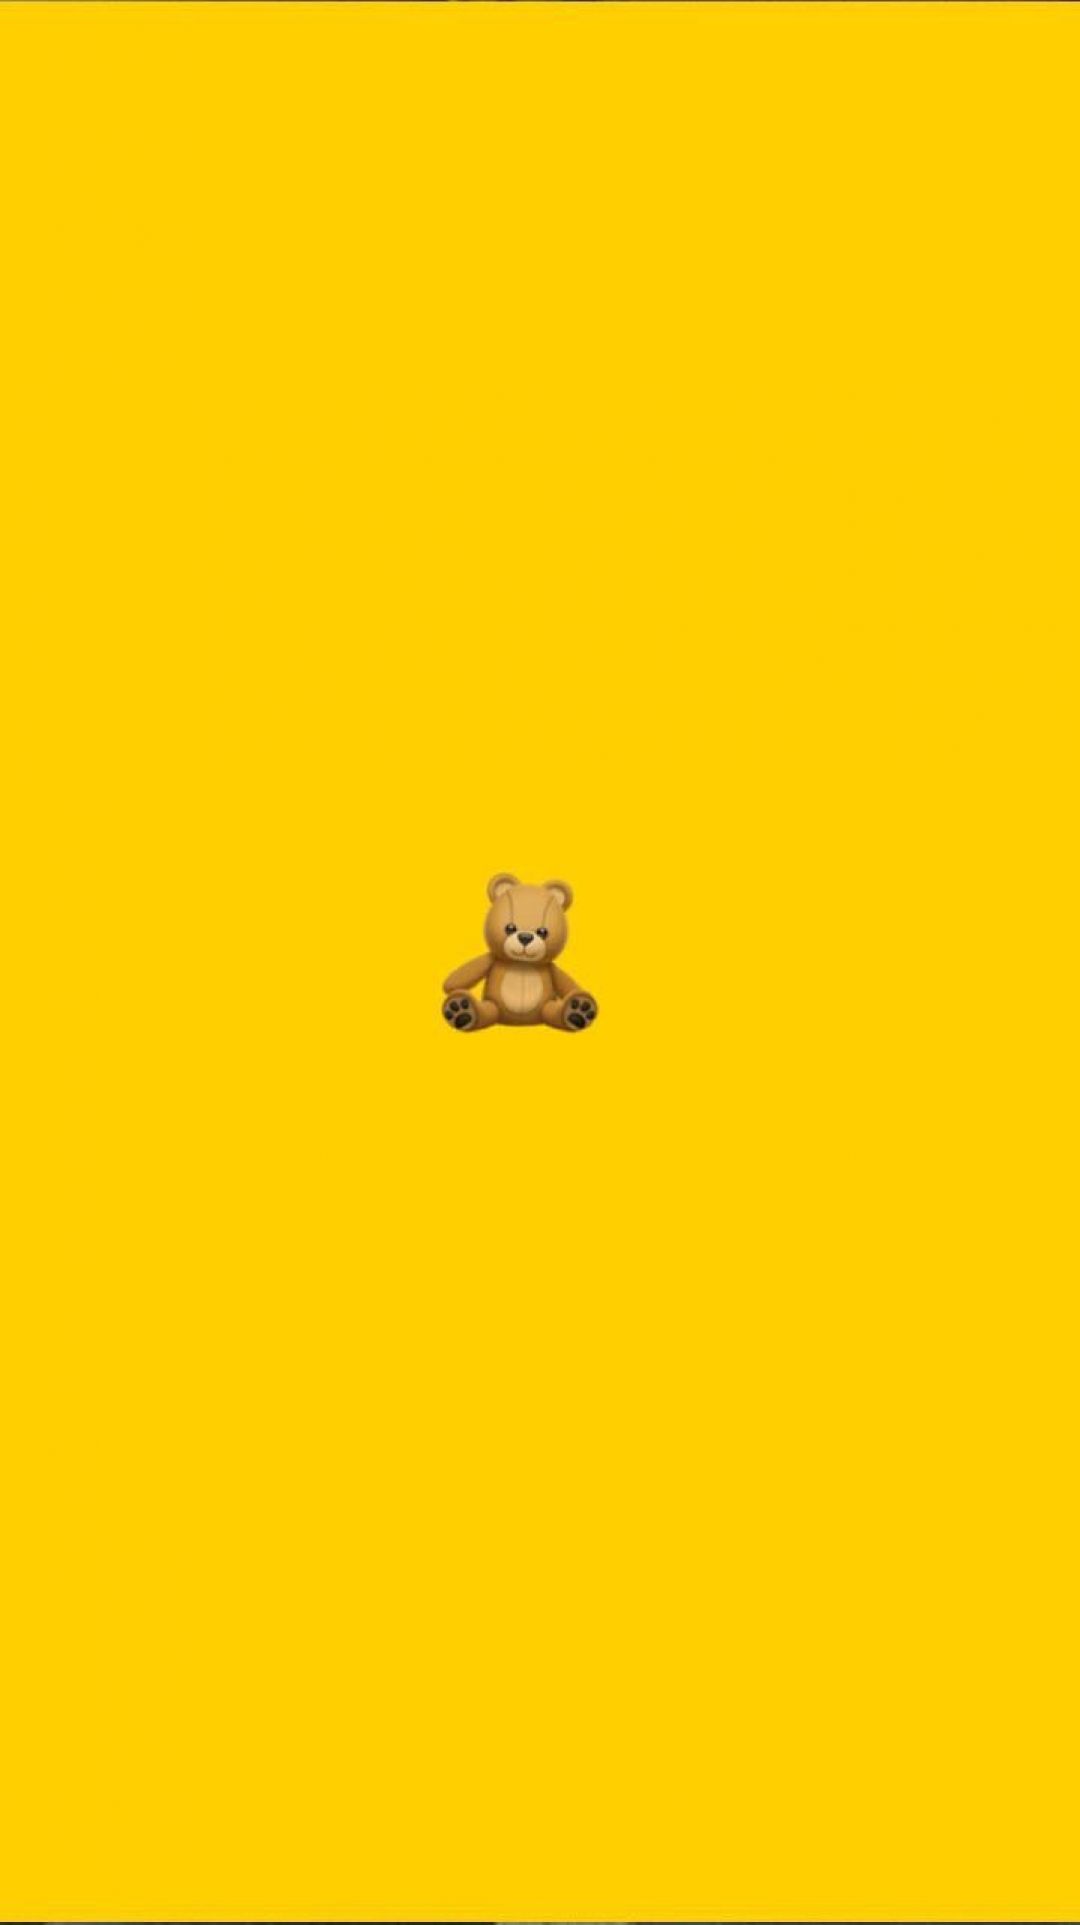 Android, Iphone, Desktop Hd Backgrounds / Wallpapers - Teddy Bear , HD Wallpaper & Backgrounds